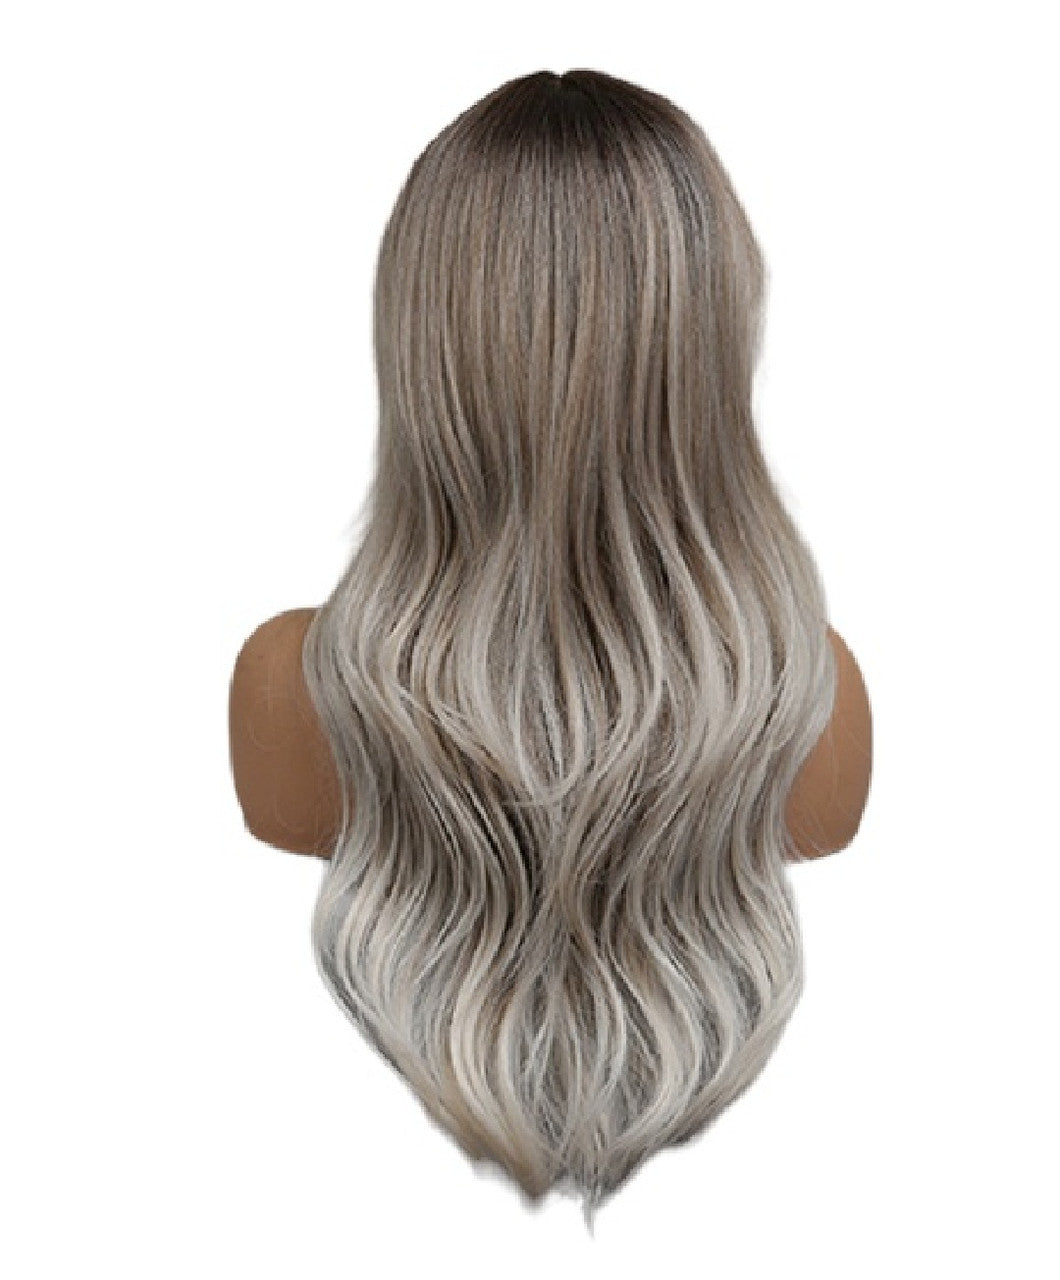 Ombre Silver Ash Blonde Wig With Fringe. Louisa wig